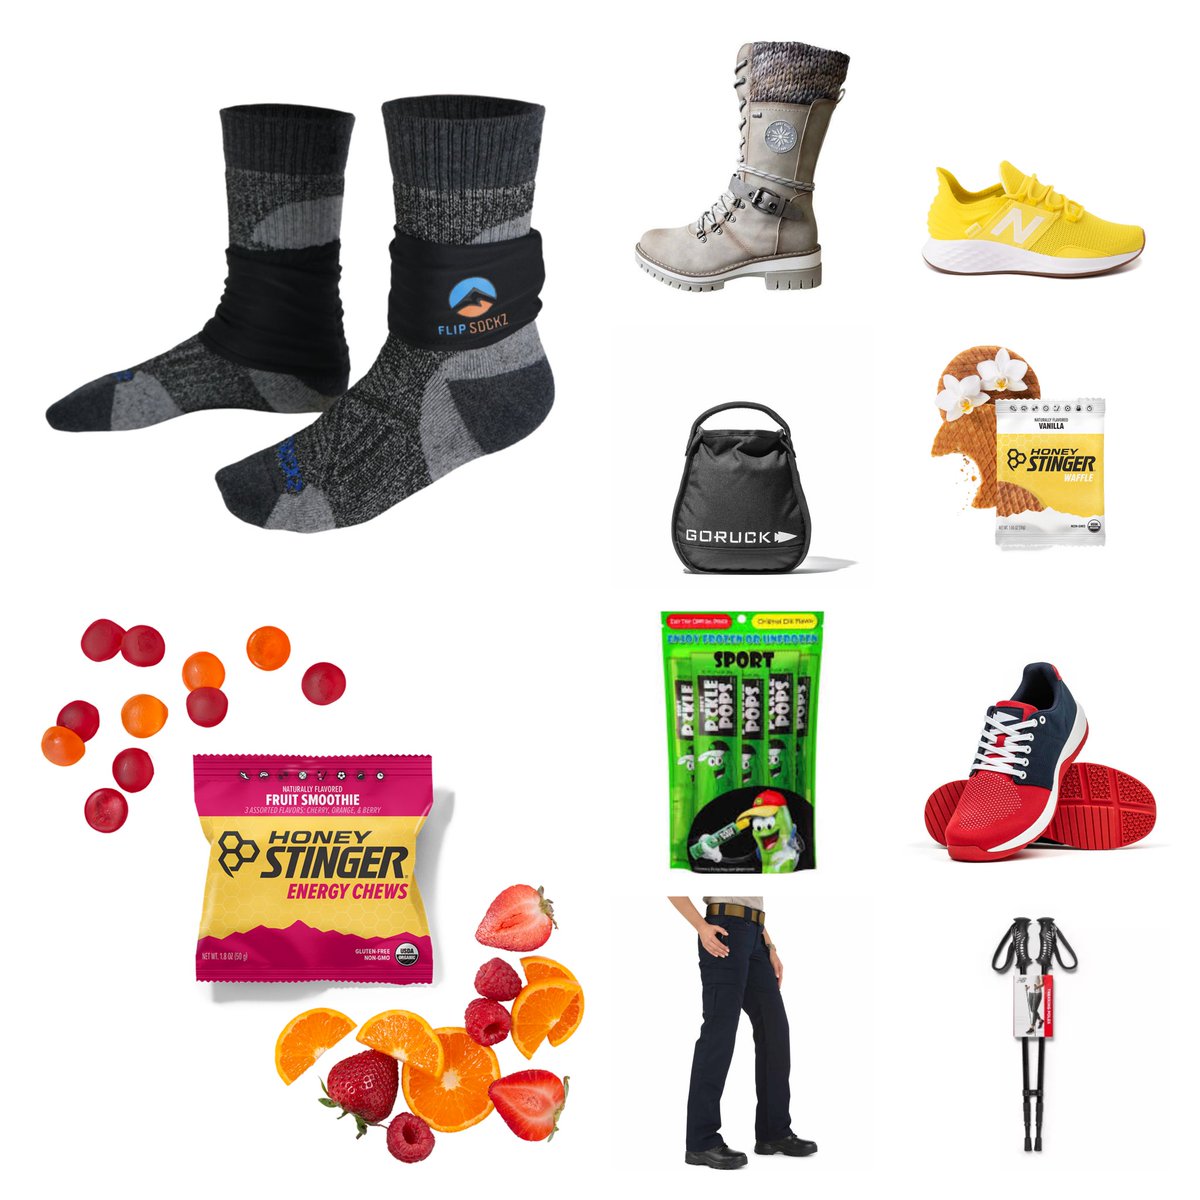 My fitness Christmas Wishlist. 
@flipsockz @HoneyStinger gummies and waffles
New ruck boots
Sand kettle bells and trainers by @GORUCK 
@BobsPicklePops 
No rip pants
@newbalance shoes
And some climbing poles